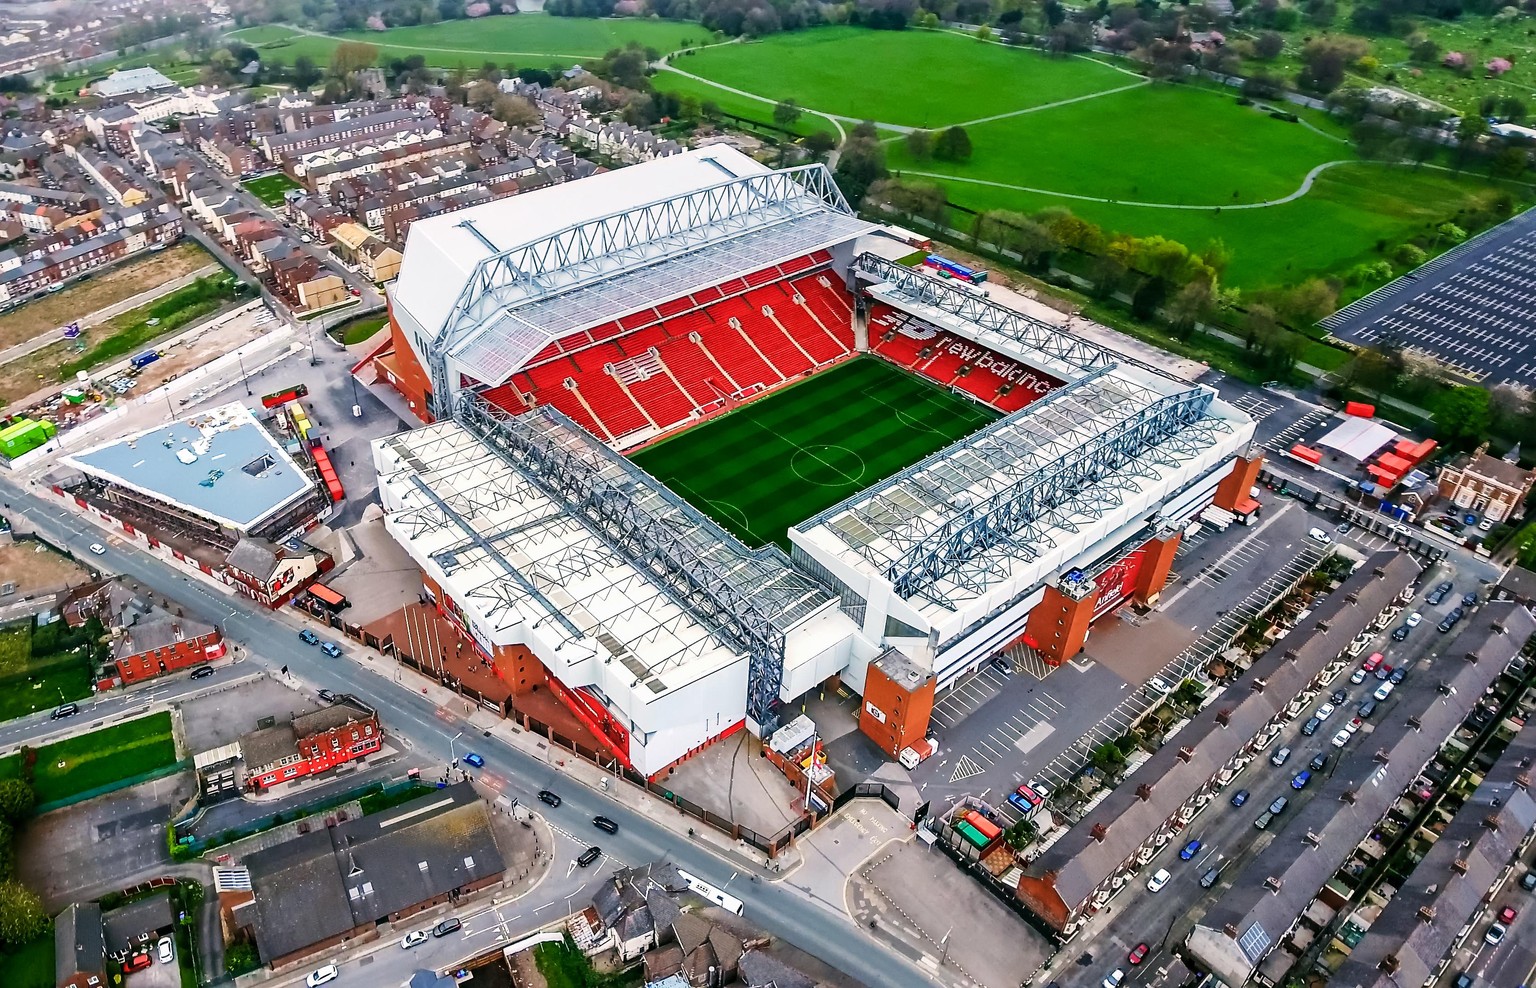 Liverpool Stadion Anfield